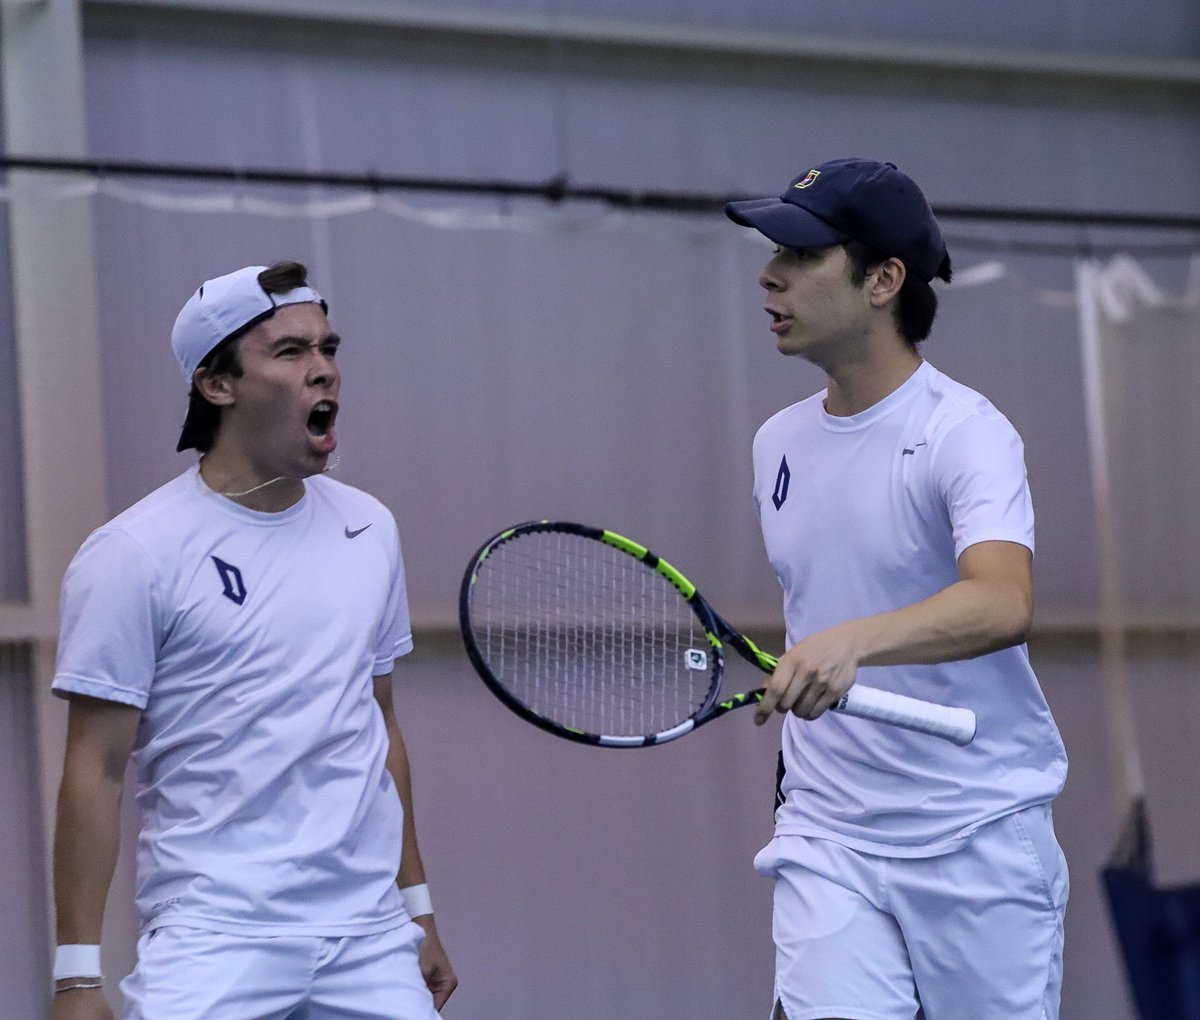 MOVING ON ➡️ QUARTERFINALS 😤 

#GoDukes | #A10MTEN